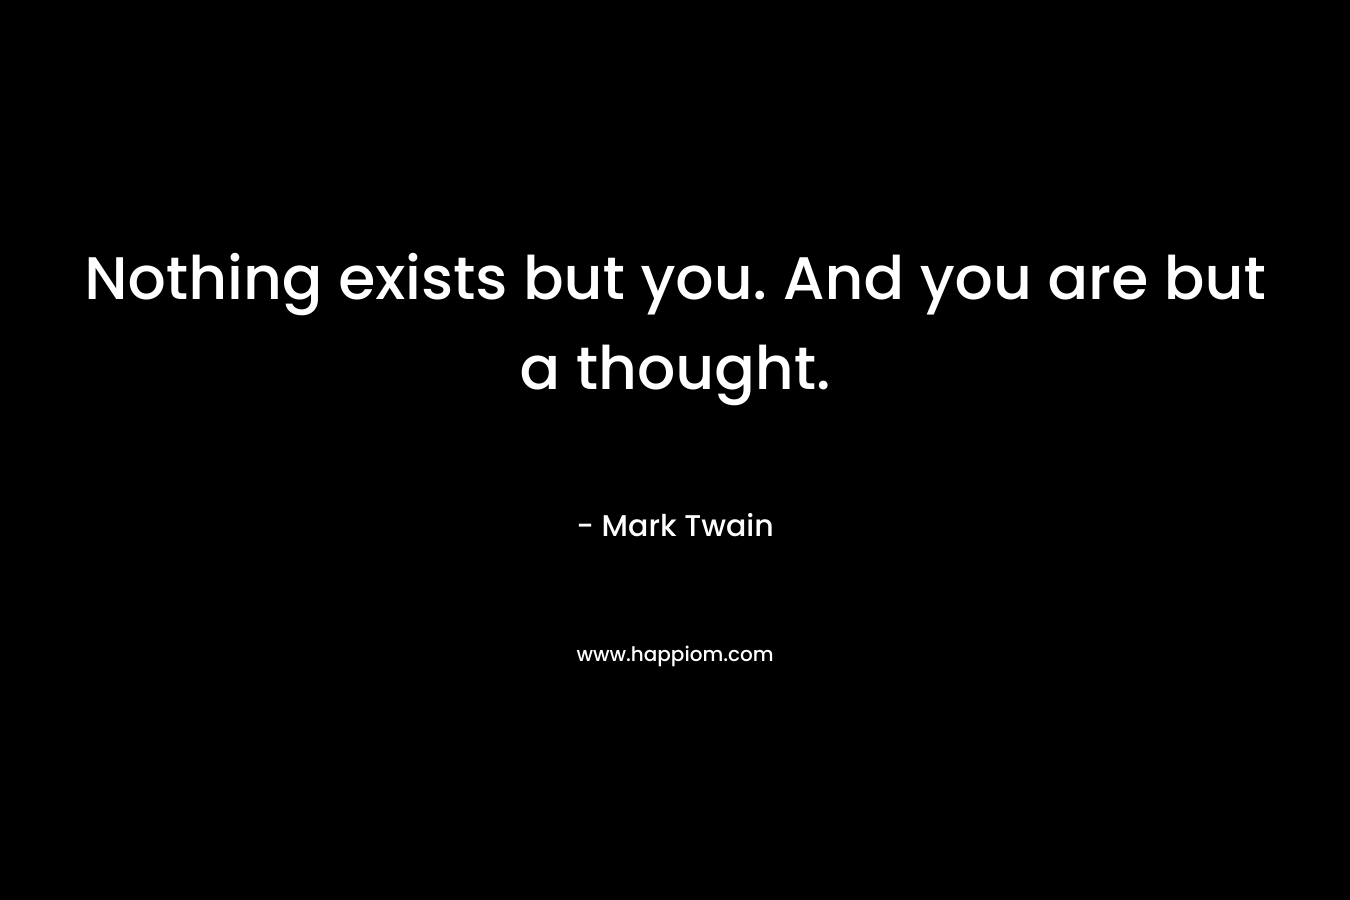 Nothing exists but you. And you are but a thought.